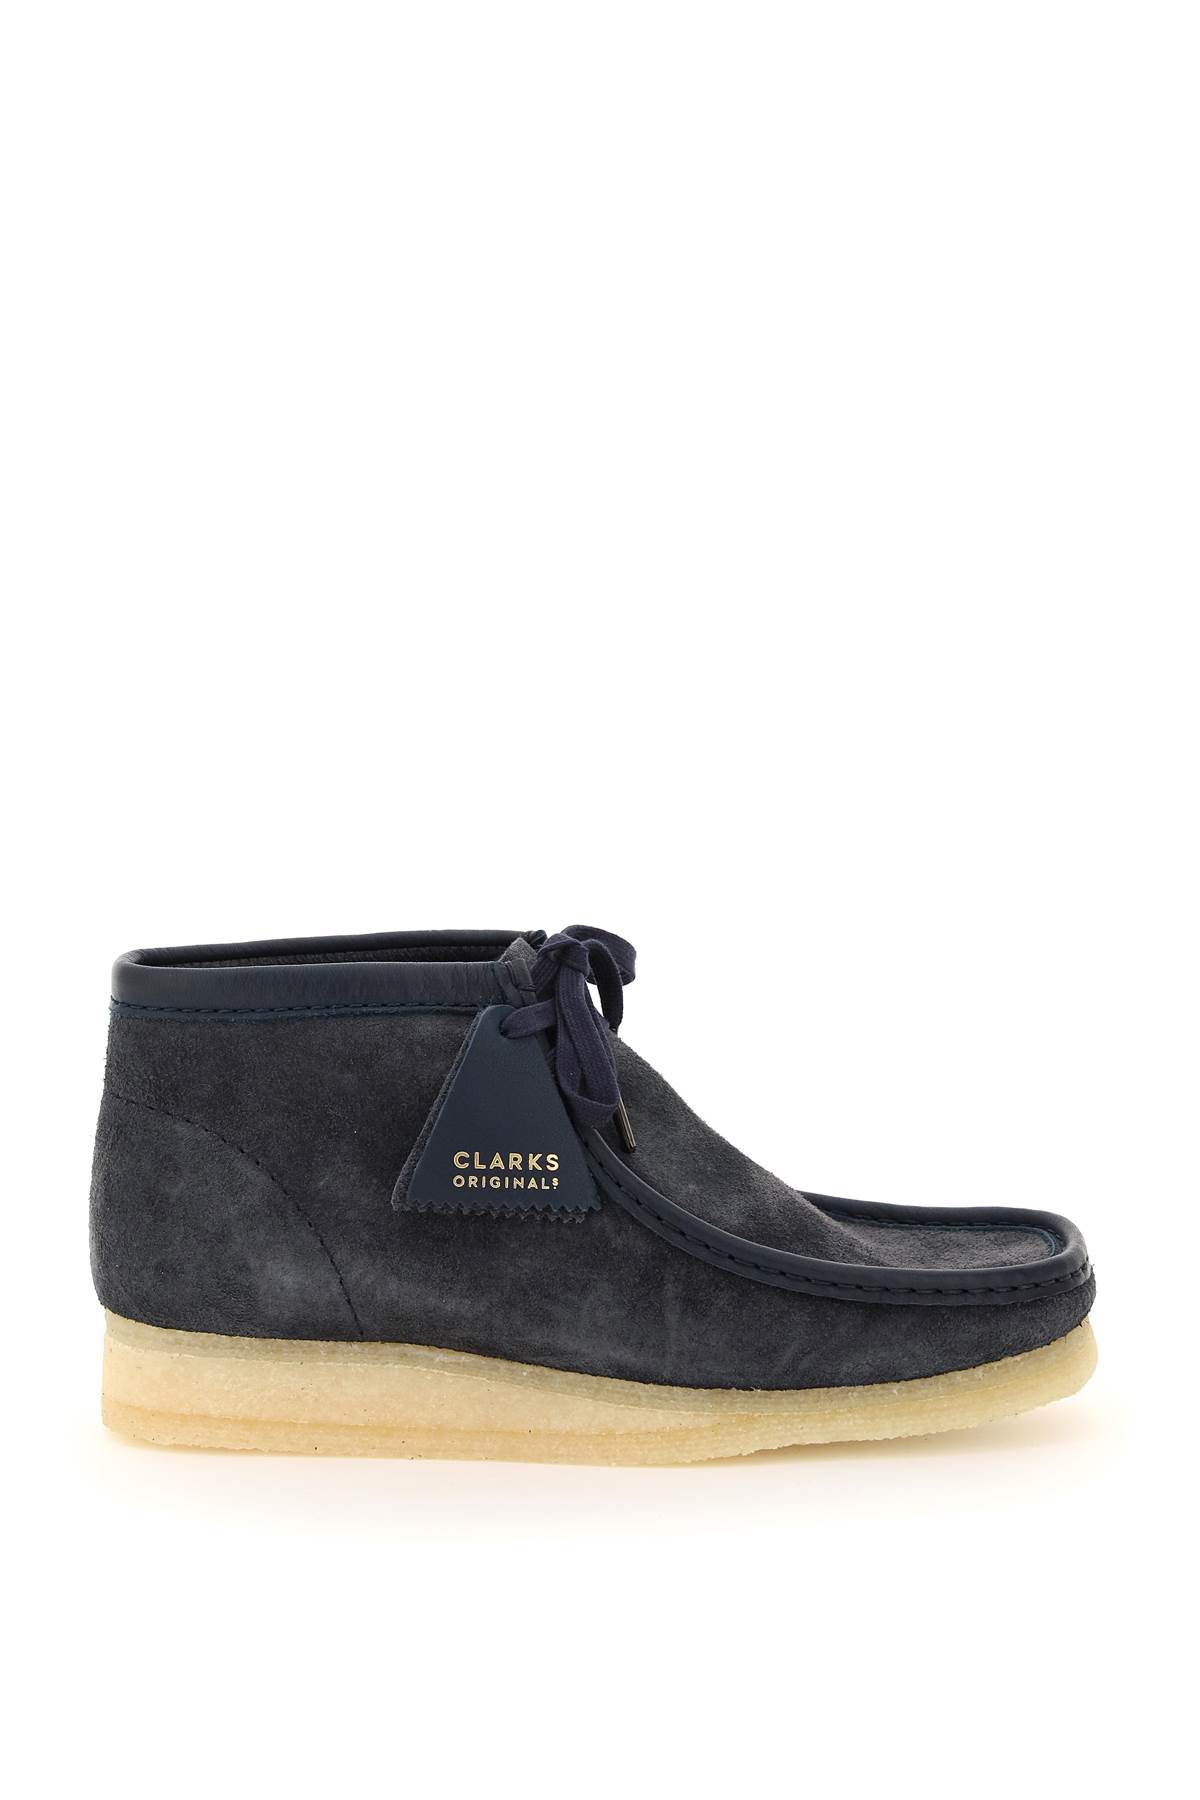 Clarks Wallabee Suede Leather Lace-up Boots